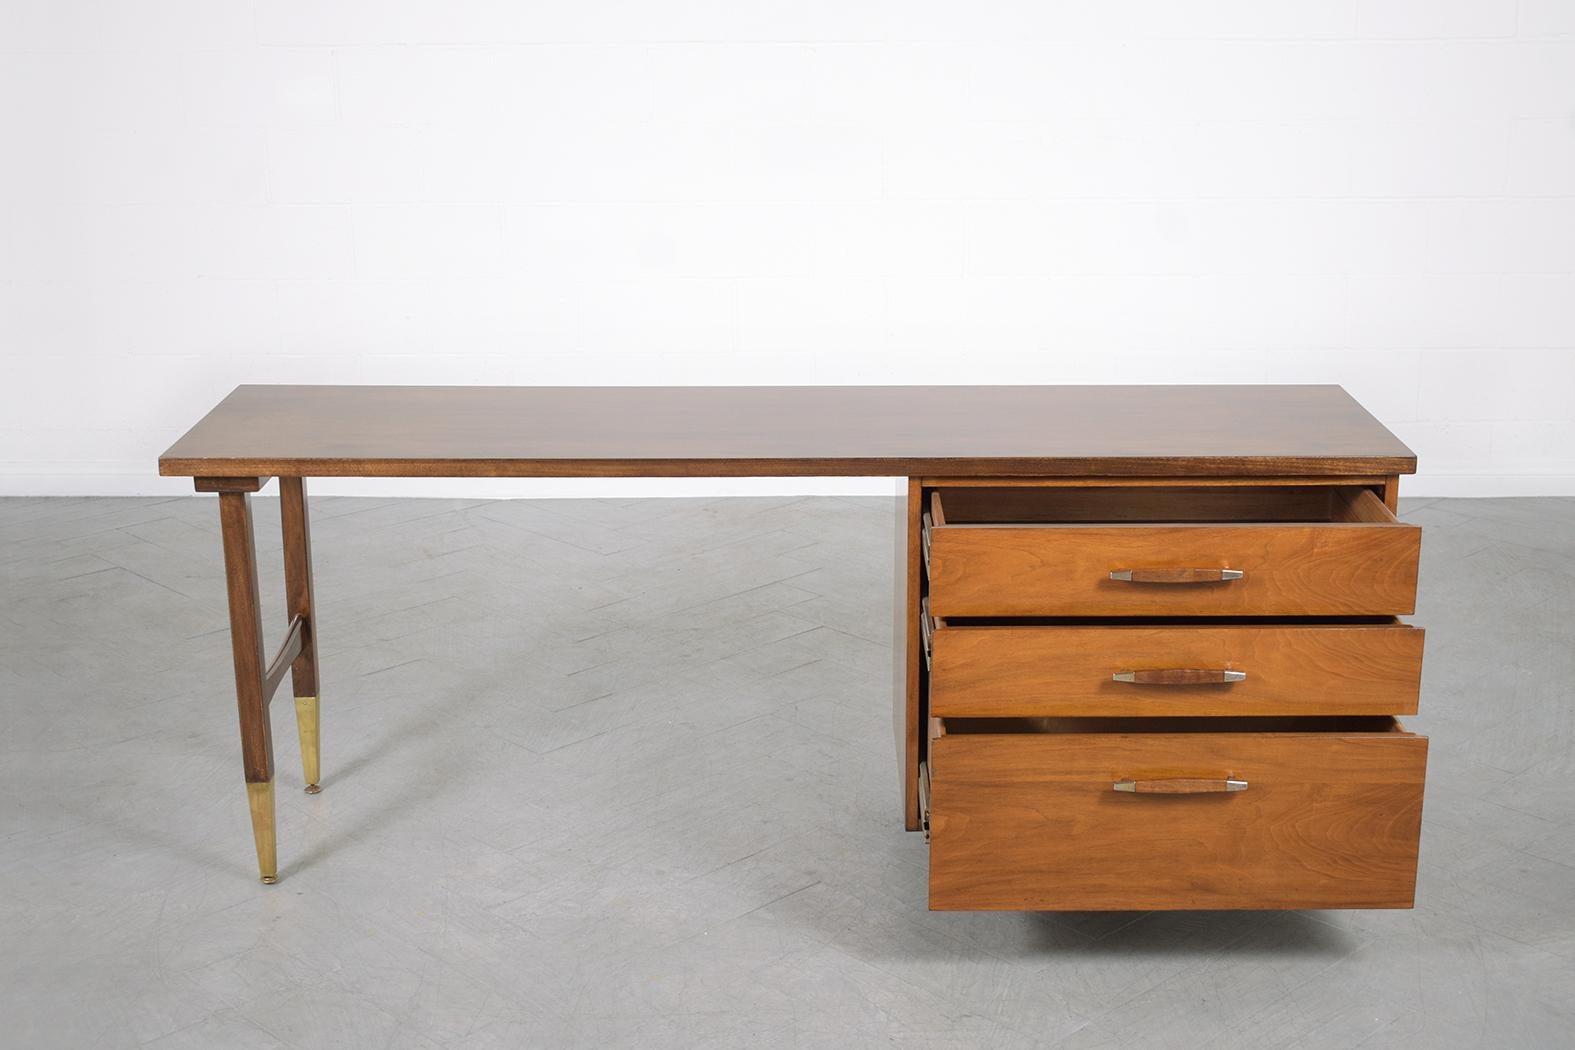 1960s Mid-Century Modern Walnut Executive Desk with Chrome Accents For Sale 1